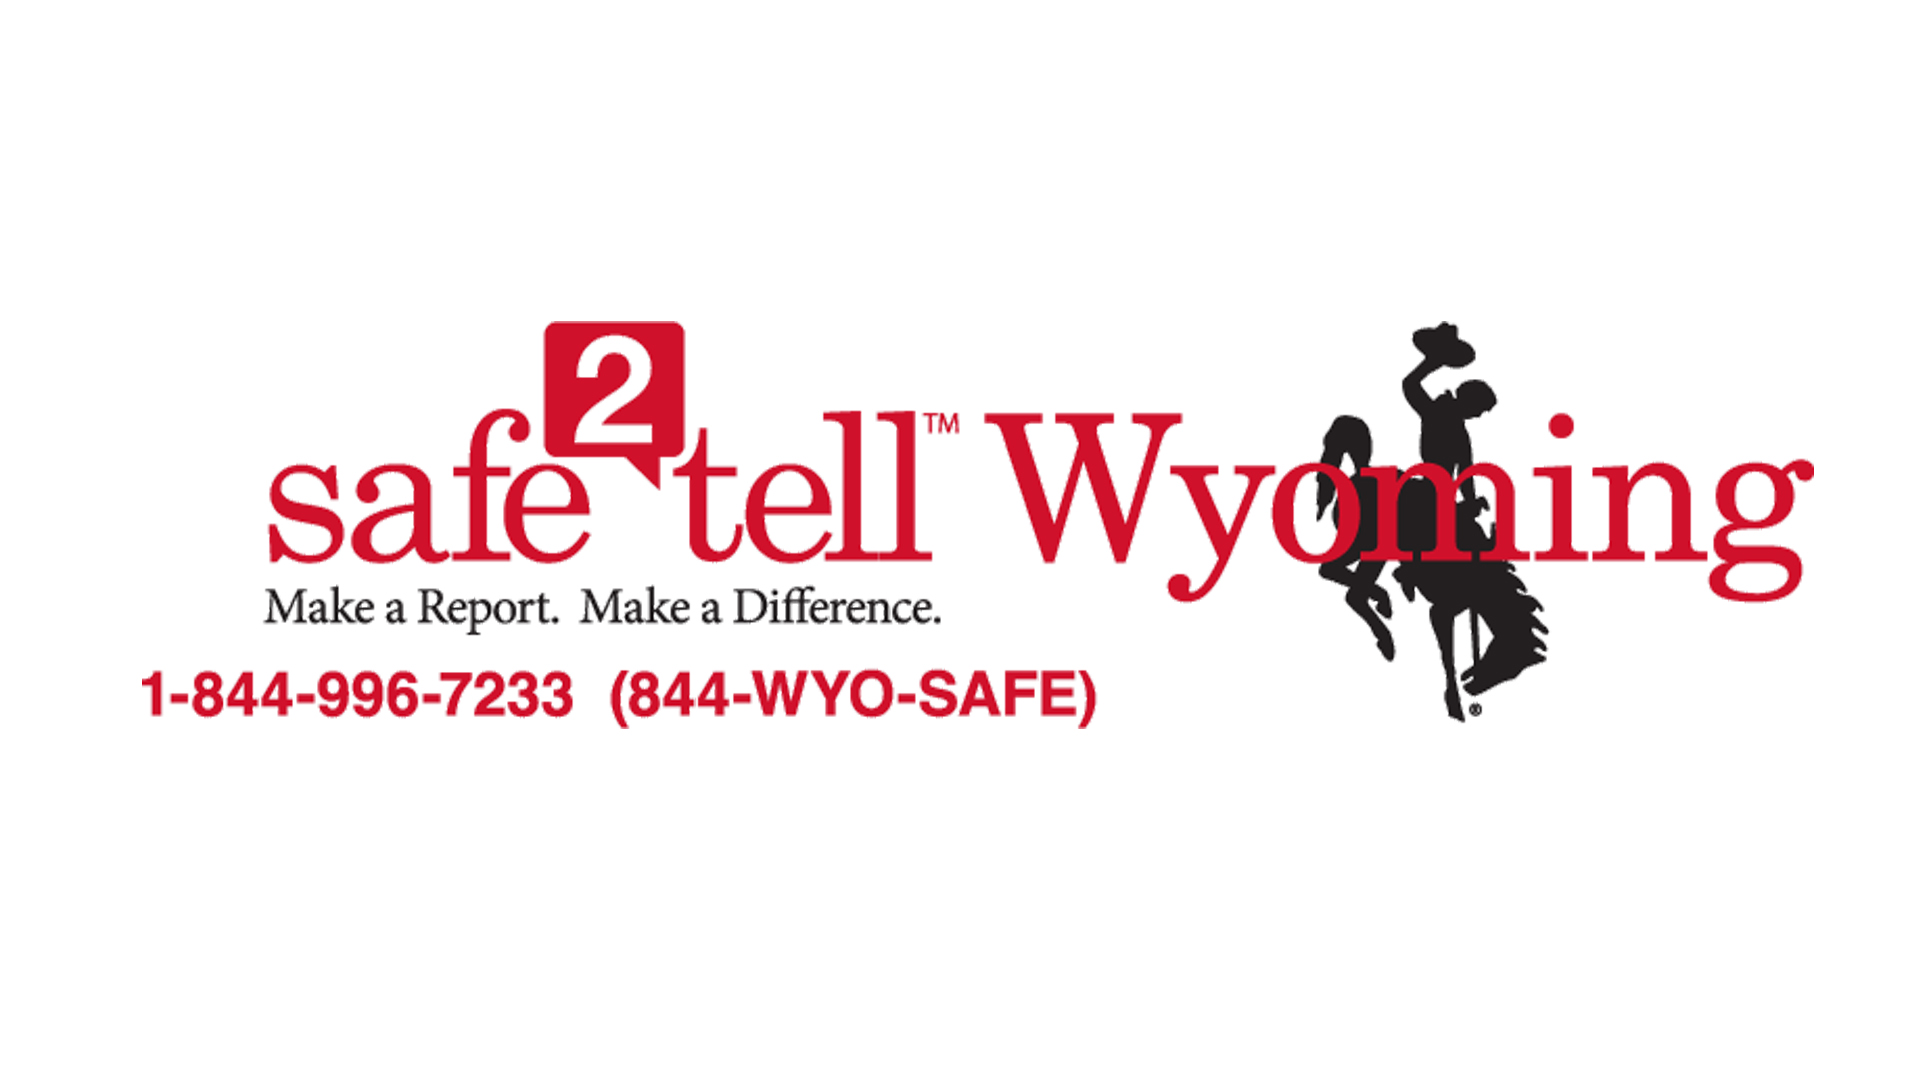 Safe2TellWyoming Make a Report. Make a Difference. 1-844-996-7233